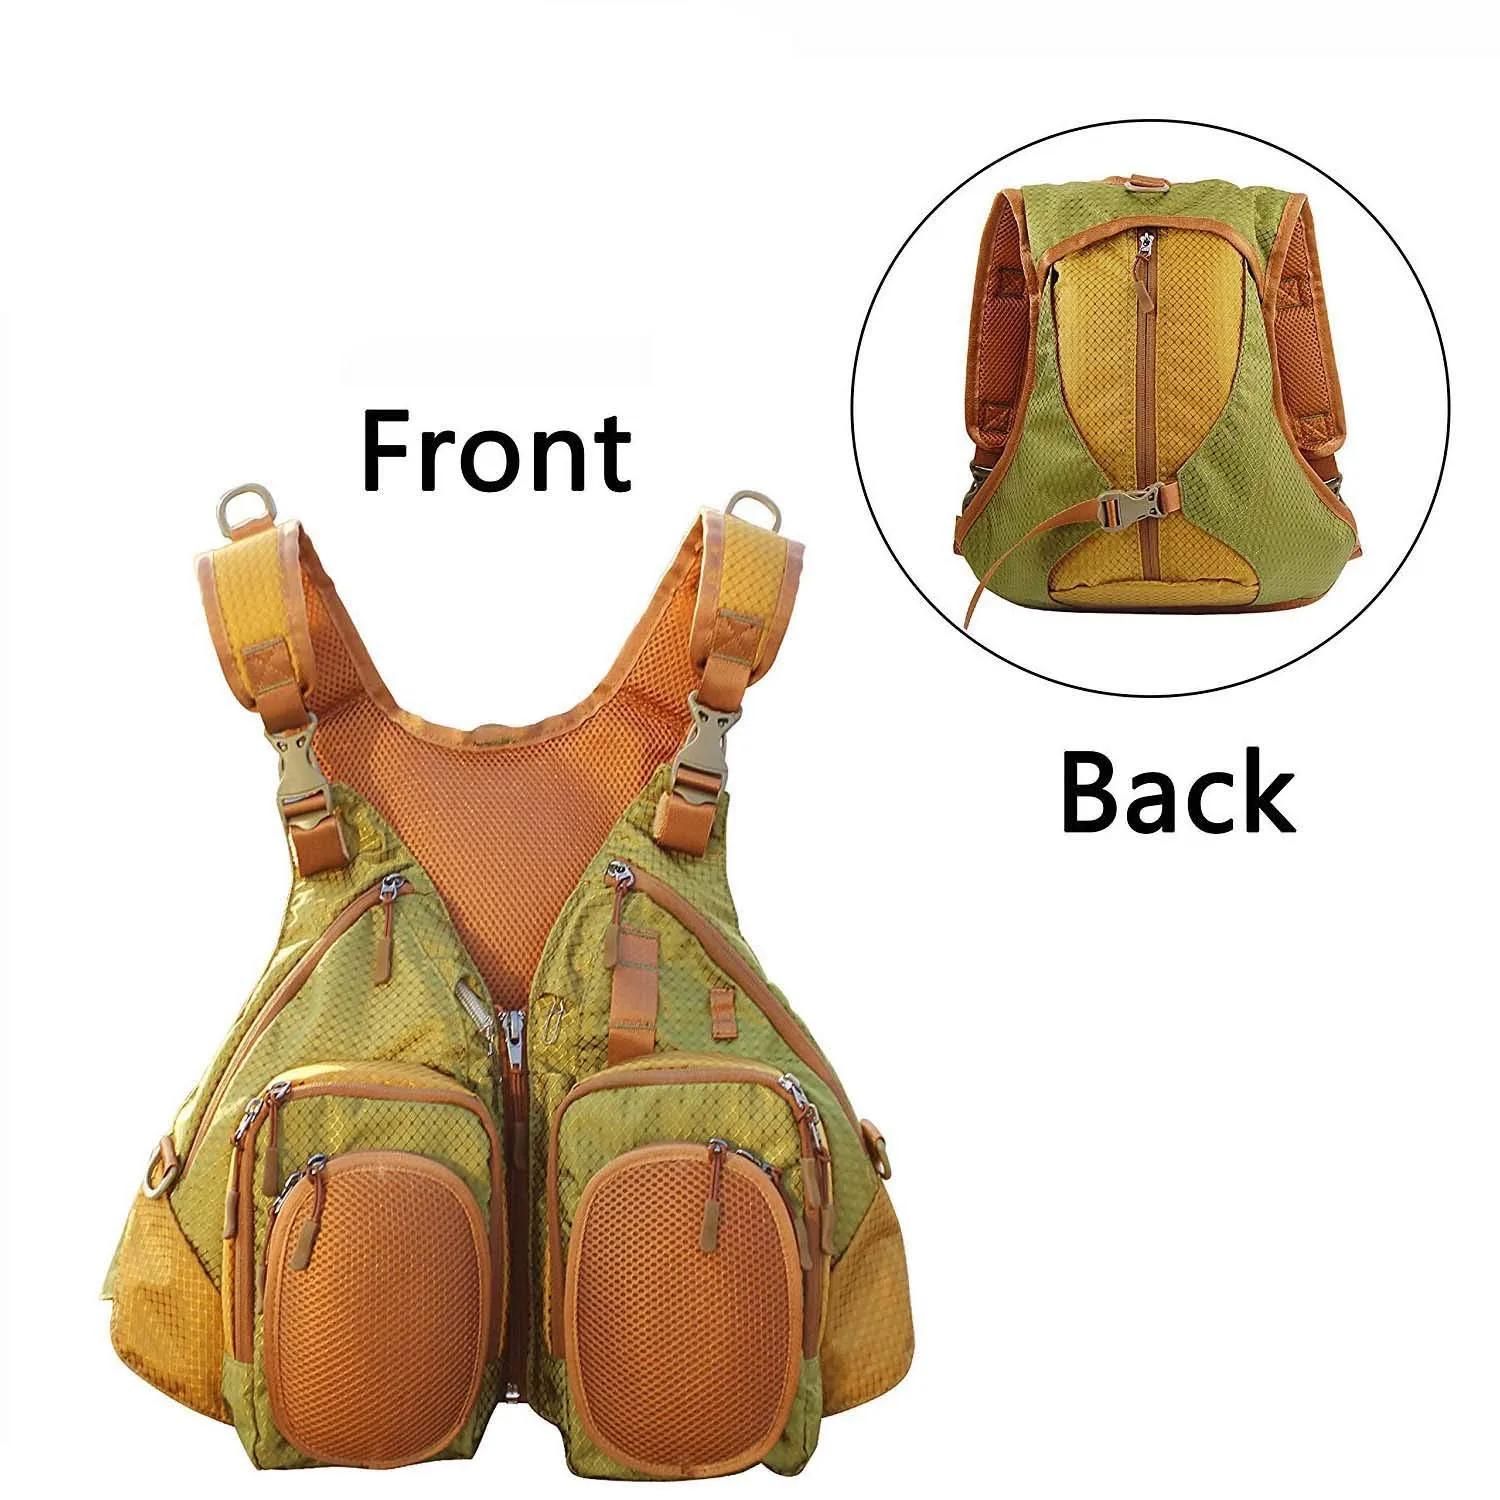 Fly Fishing Backpack Vest Combo Fly Fishing Vest Pack Fishing Sling Pack Hard Shell Storage Tackle Gear Accessories Green Buy Backpack Fly Fishing Backpack Fly Fishing Vest Pack Product On Alibaba Com